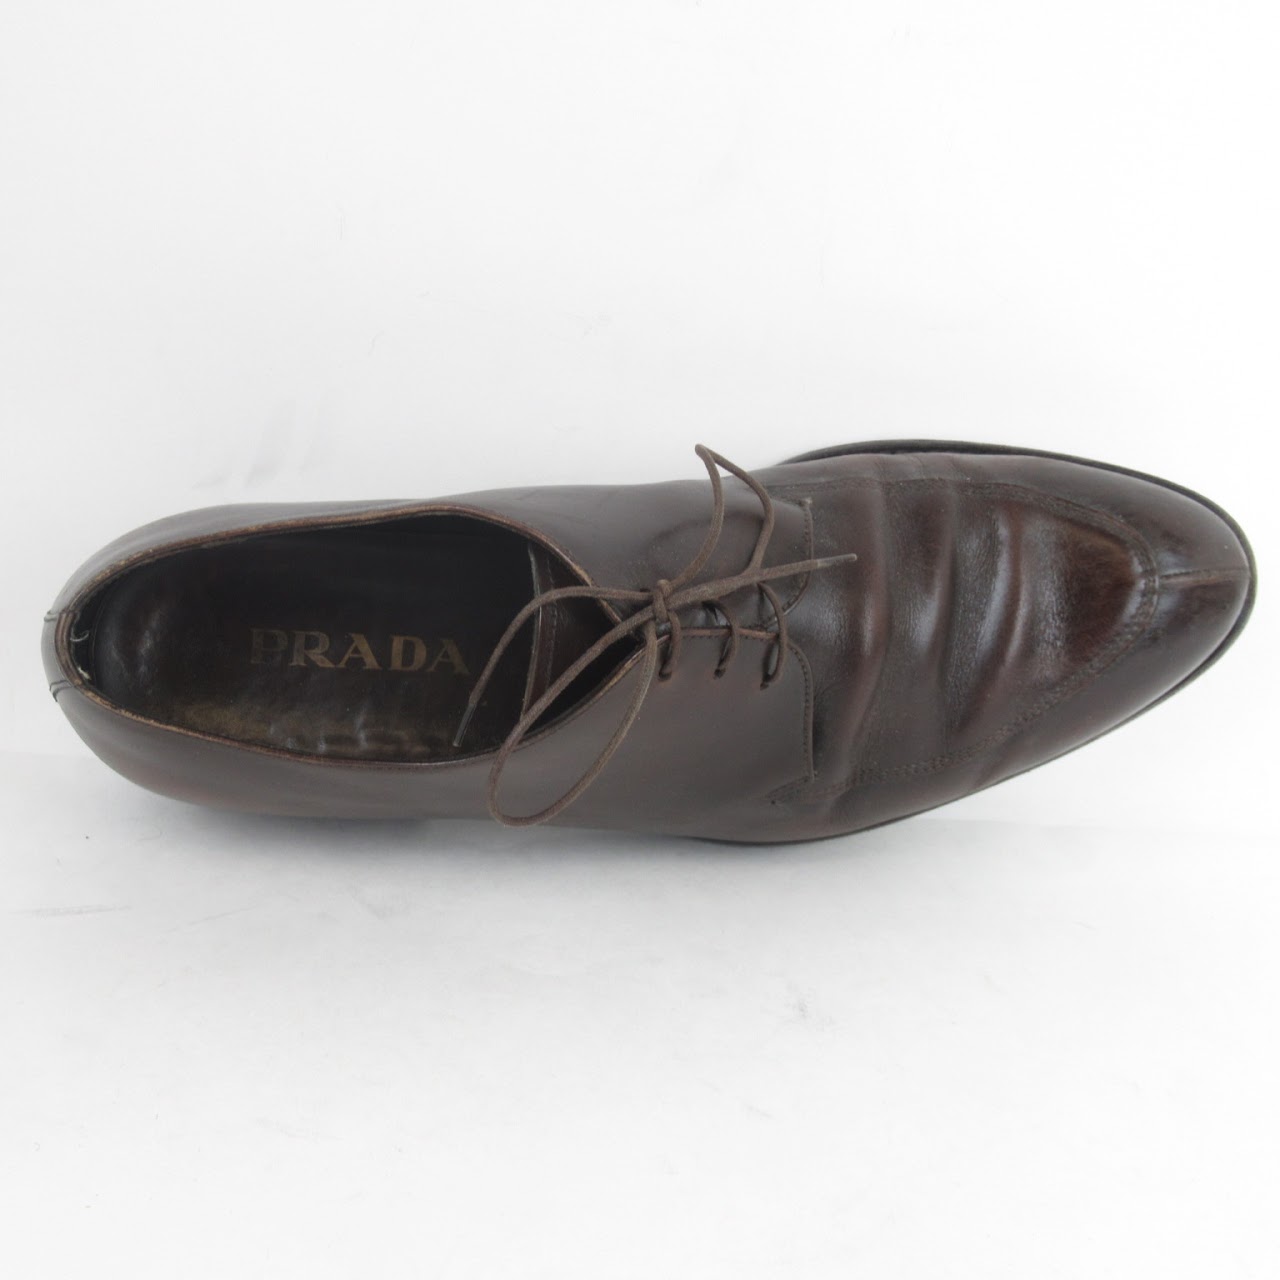 Prada Brown Leather Derby Shoes